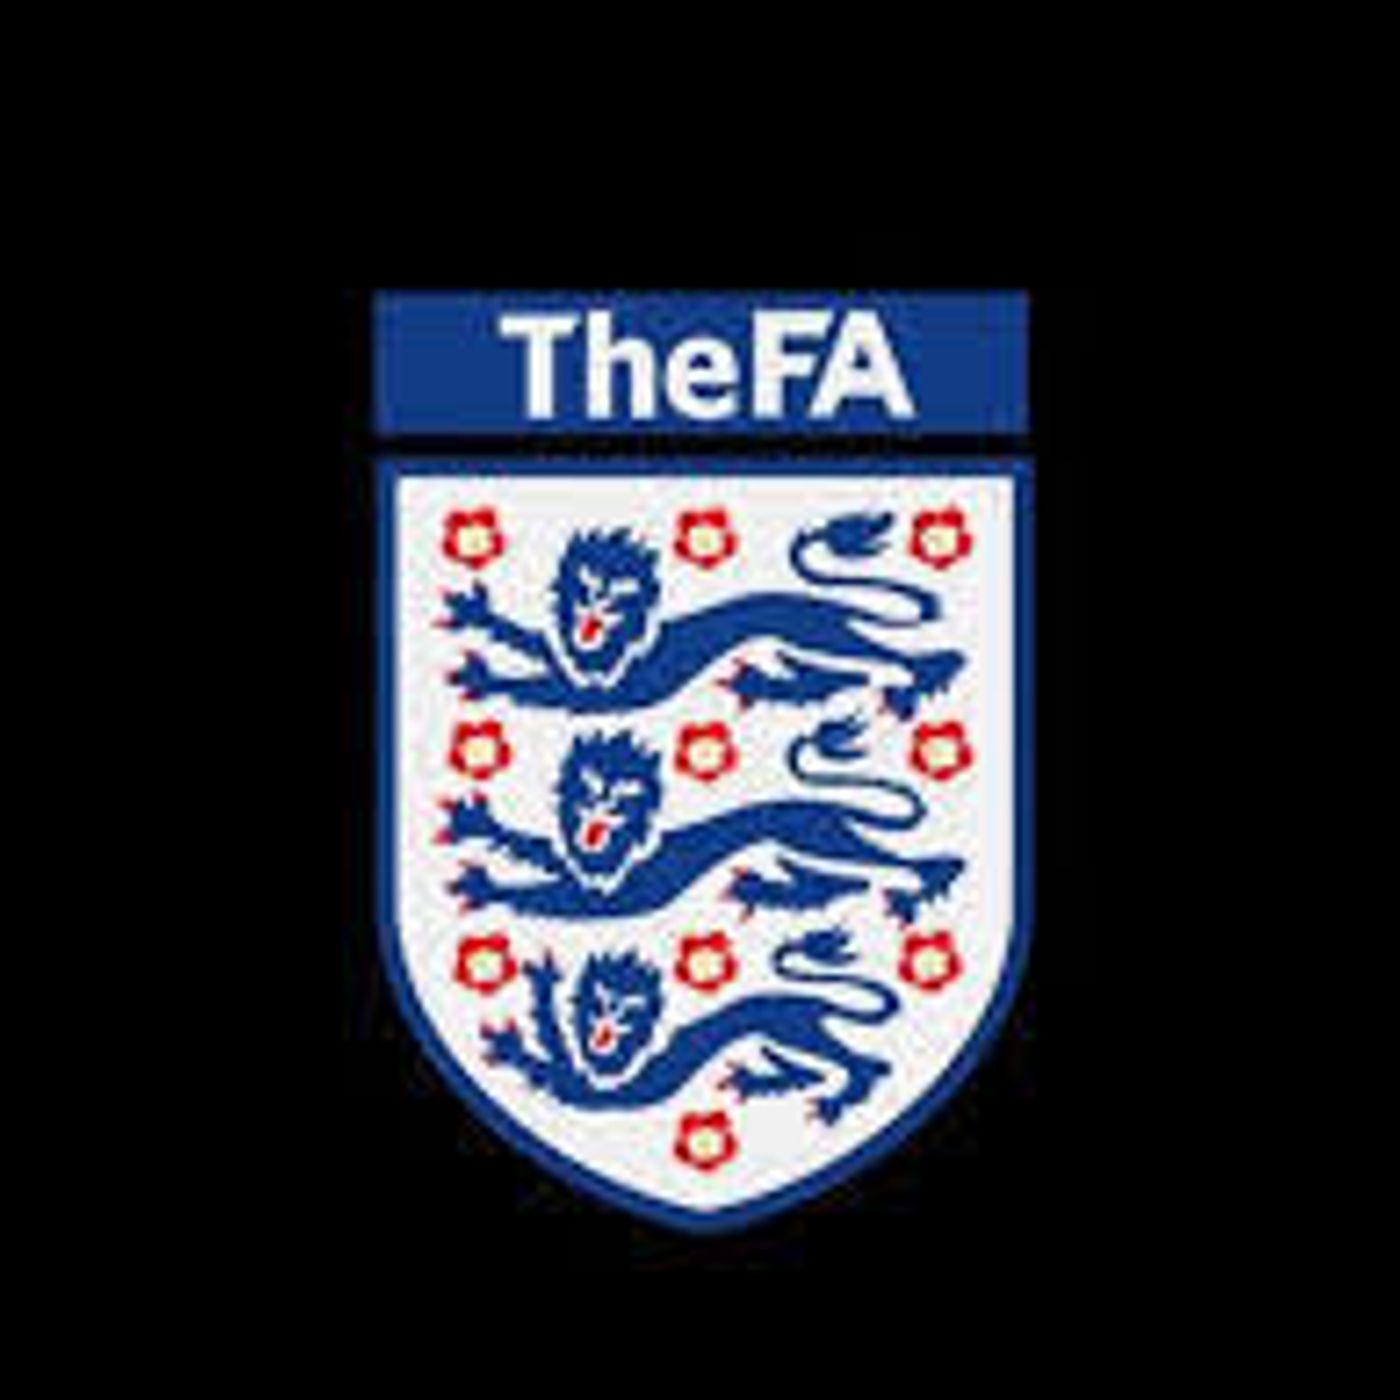 S1 Ep1162: English Football Association Creating More Inclusive Opportunities